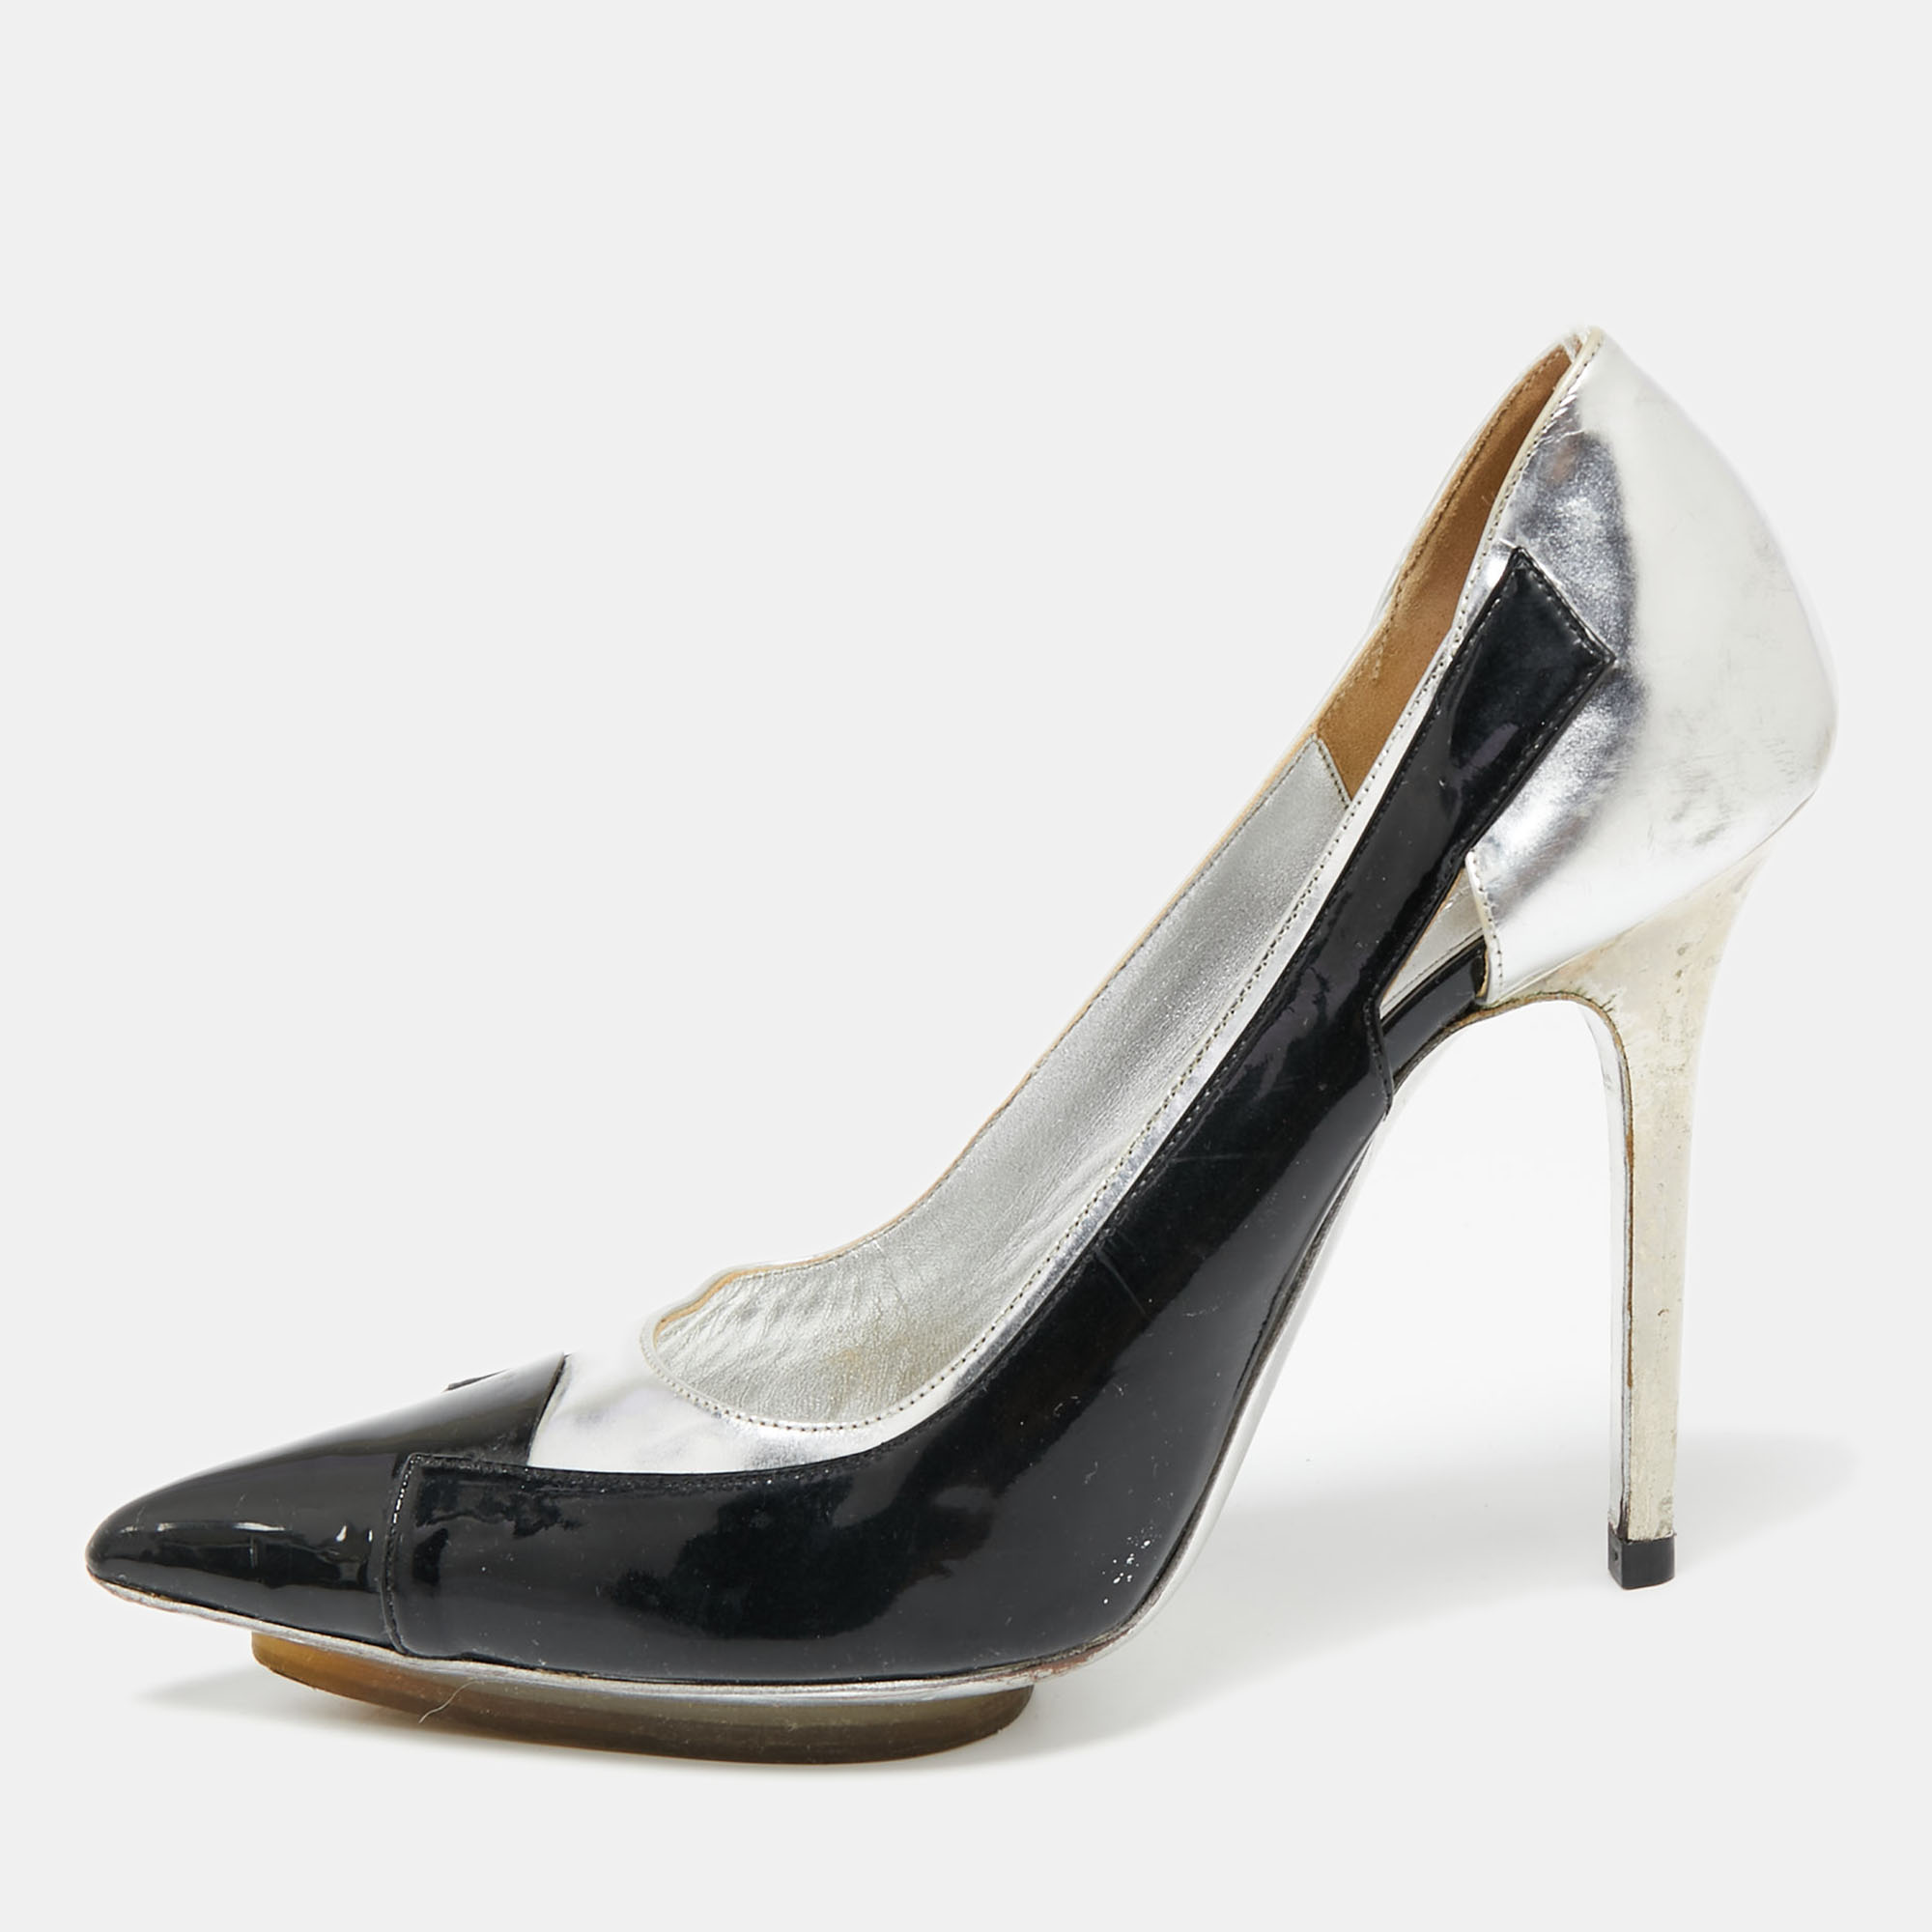 Balenciaga Silver/Black Patent And Leather Pointed Toe Pumps Size 38.5